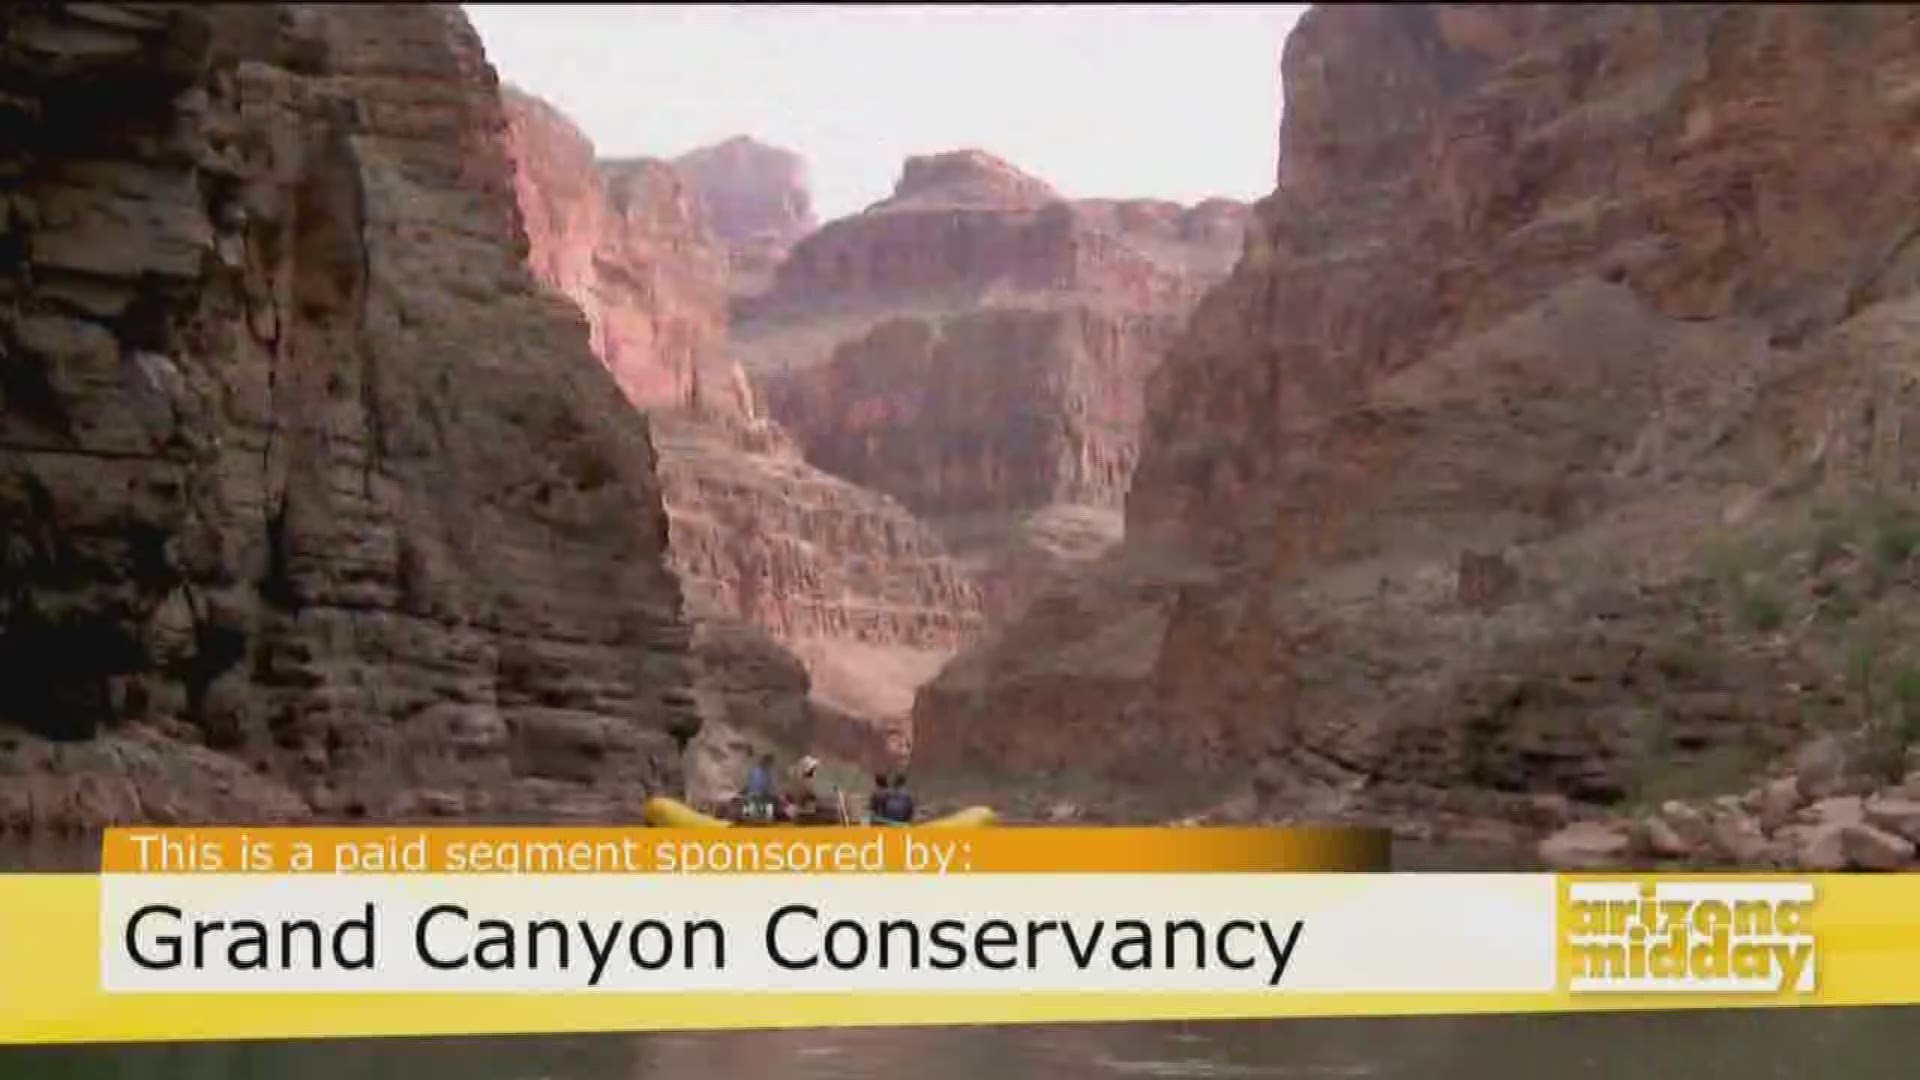 Mindy Riesenberg tells us how the Grand Canyon Conservancy and the Dark Skies Project plus trail restoration at the Grand Canyon, and how you can be a part of the conservation process.